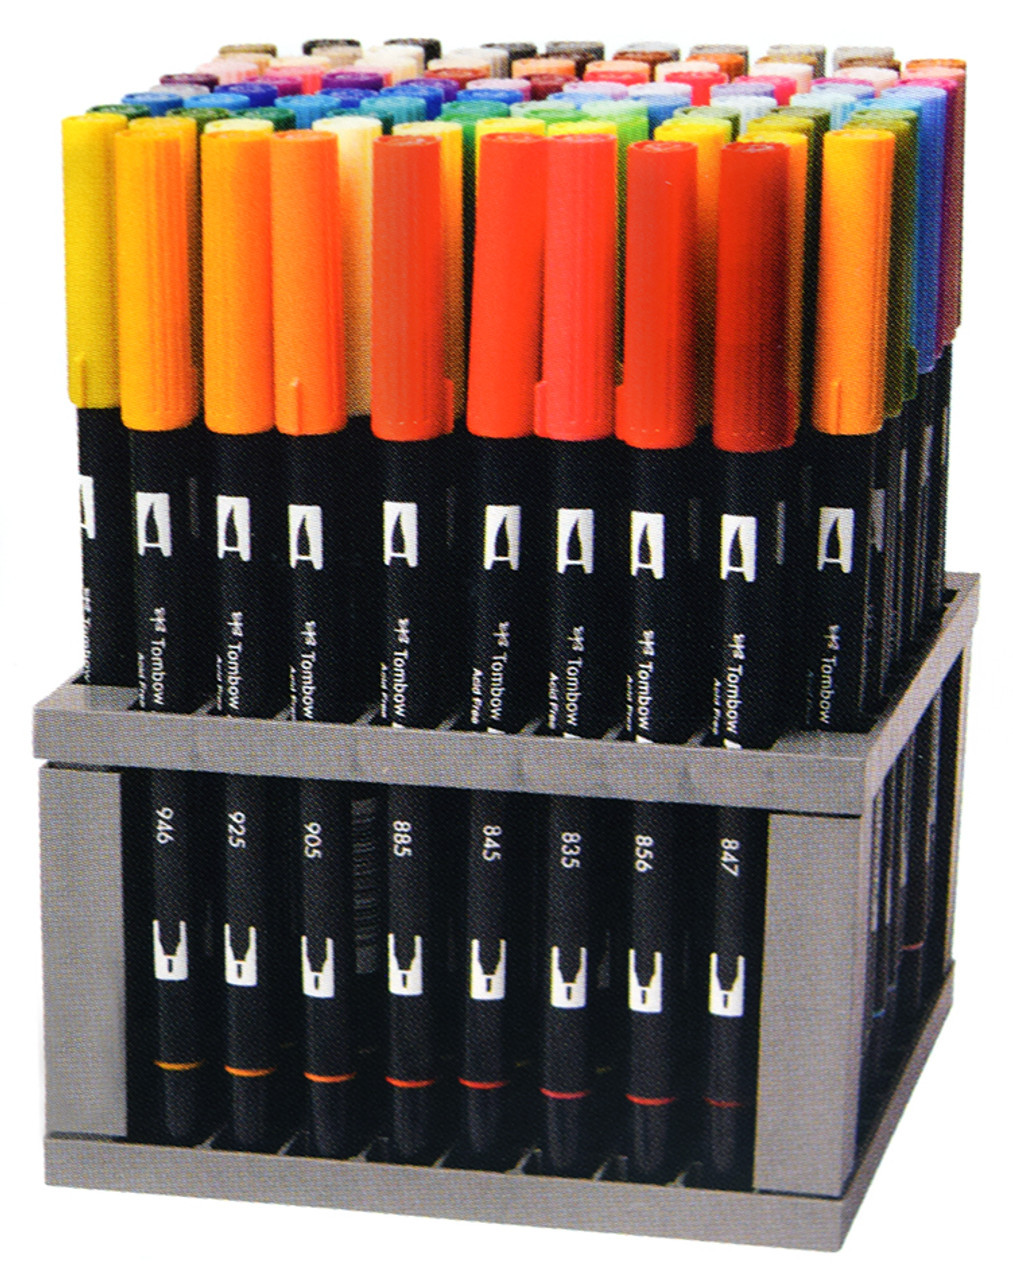 Tombow Dual Brush Pen Set of 96 Colors with Stand - John Neal Books